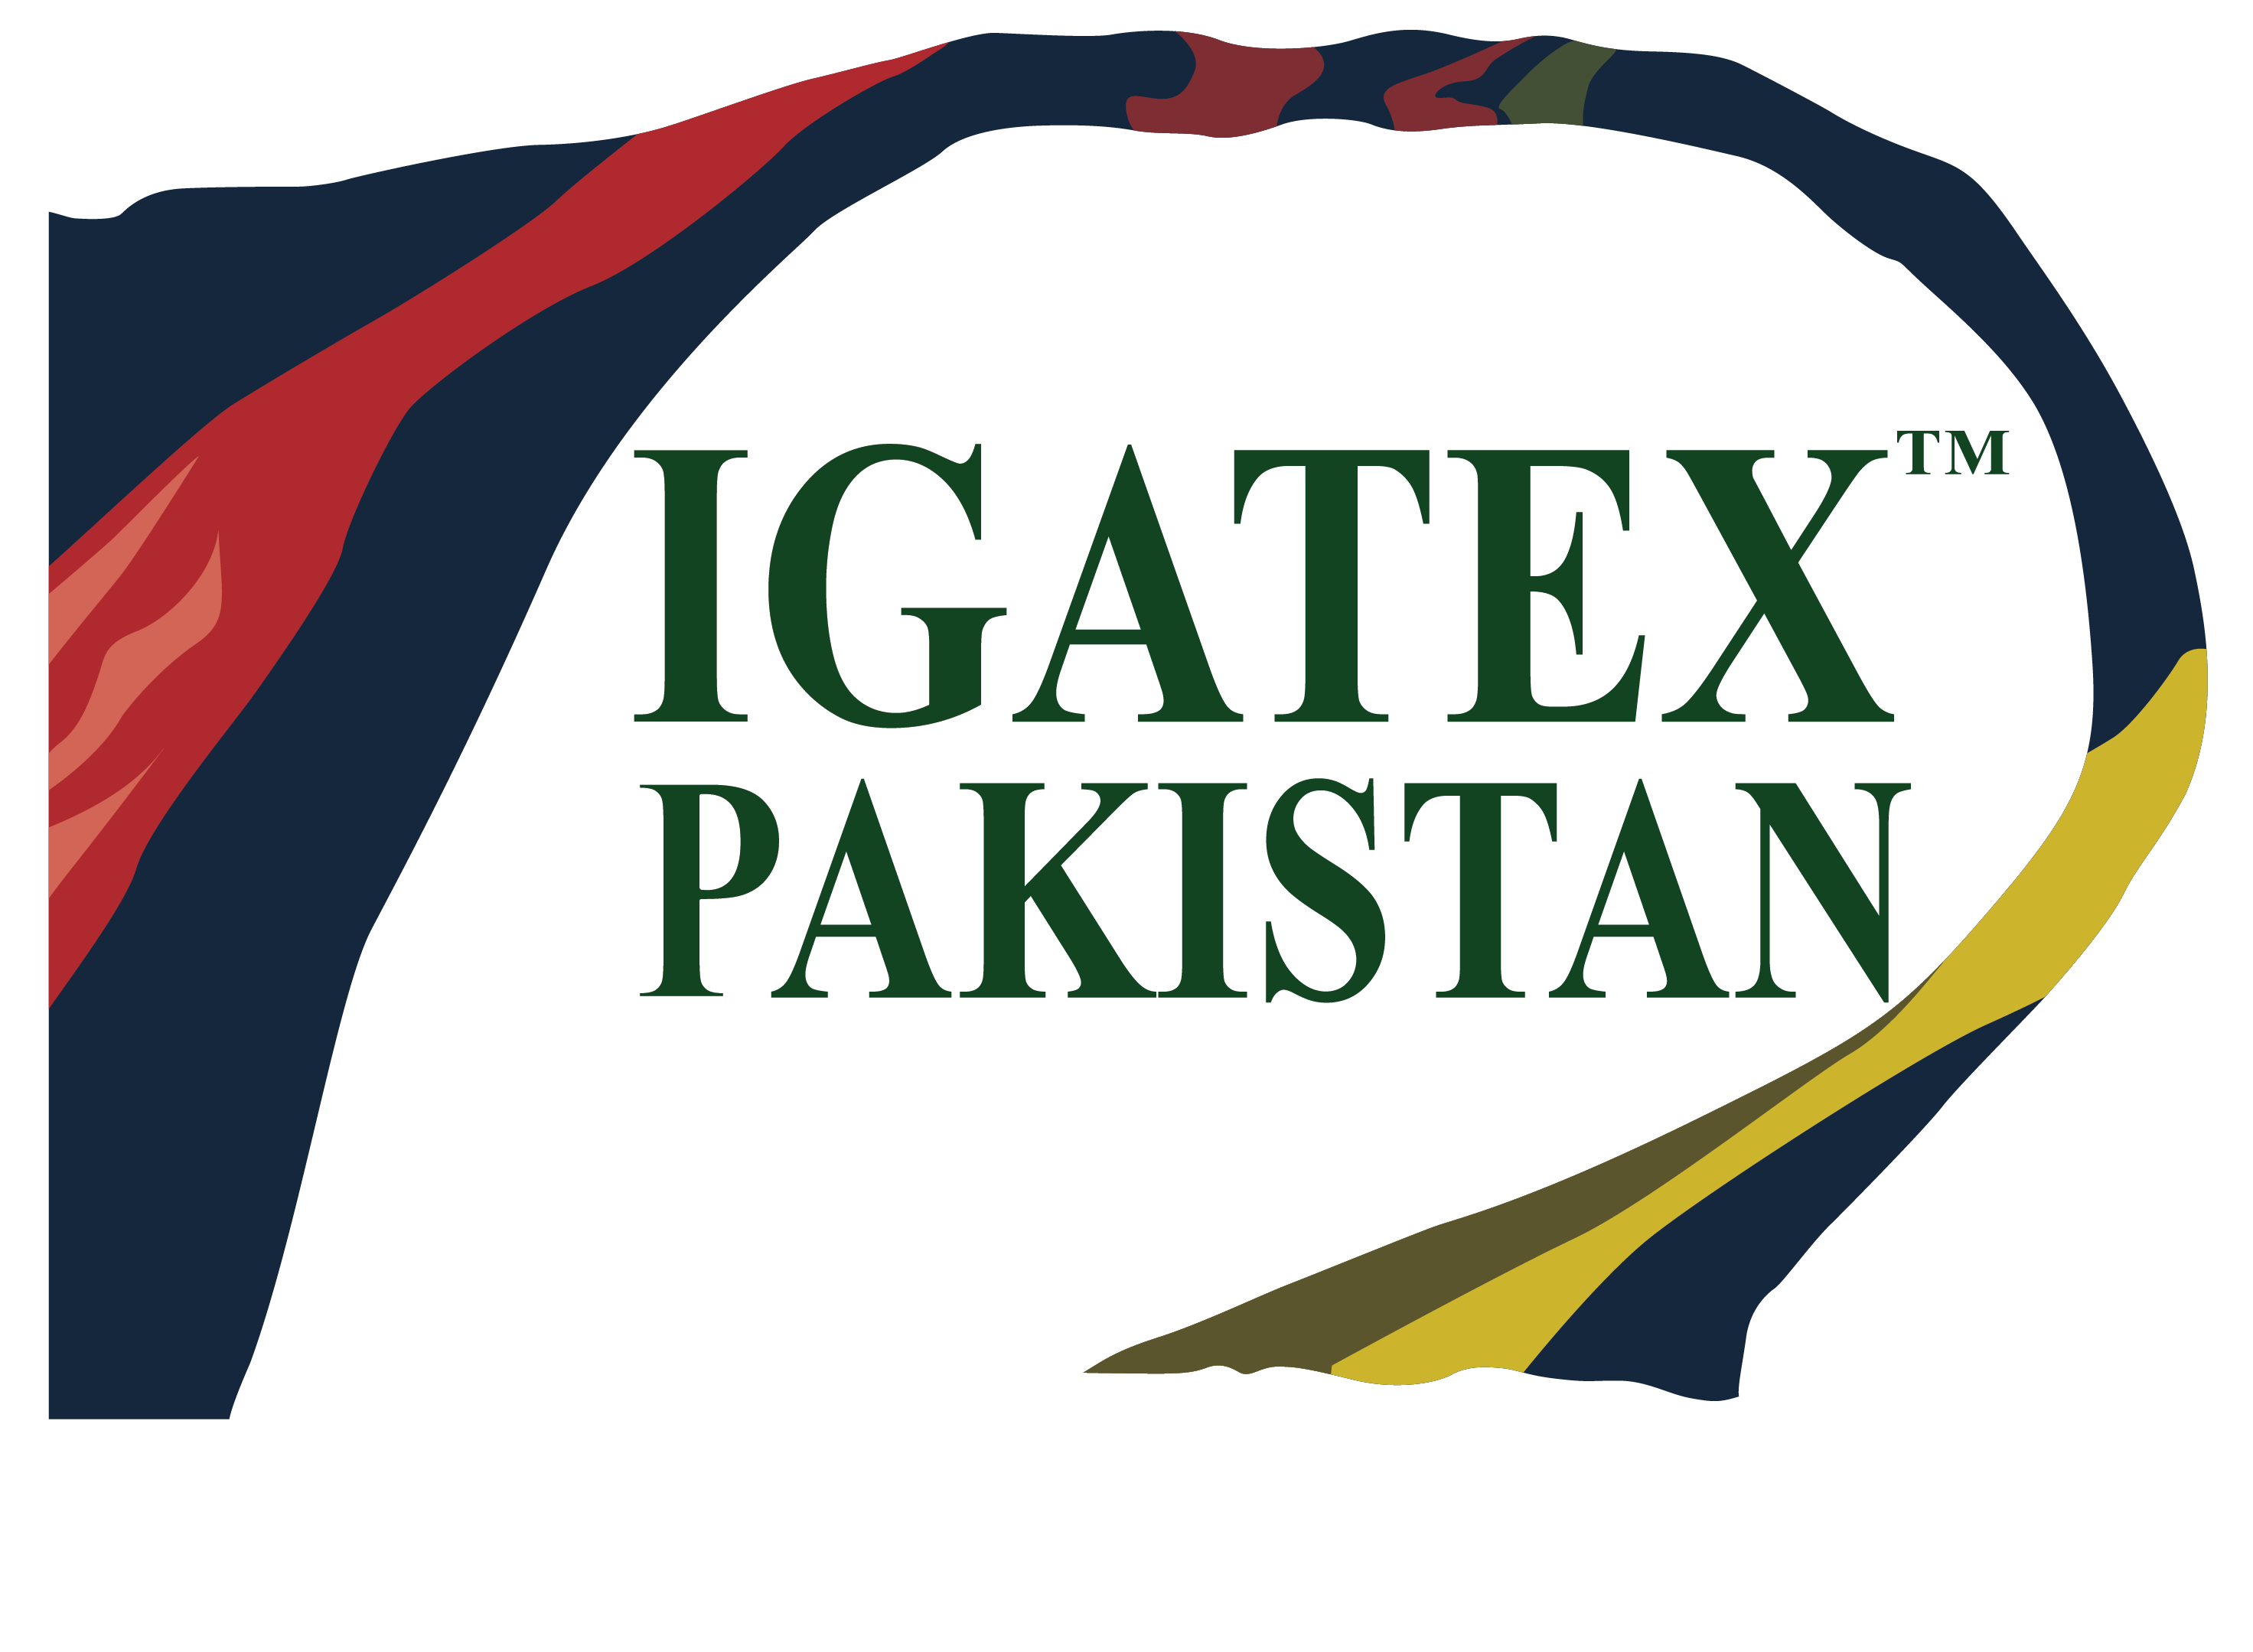 IGATEX PAKISTAN WITH FABRIC LOGO FINAL APPROVED-01